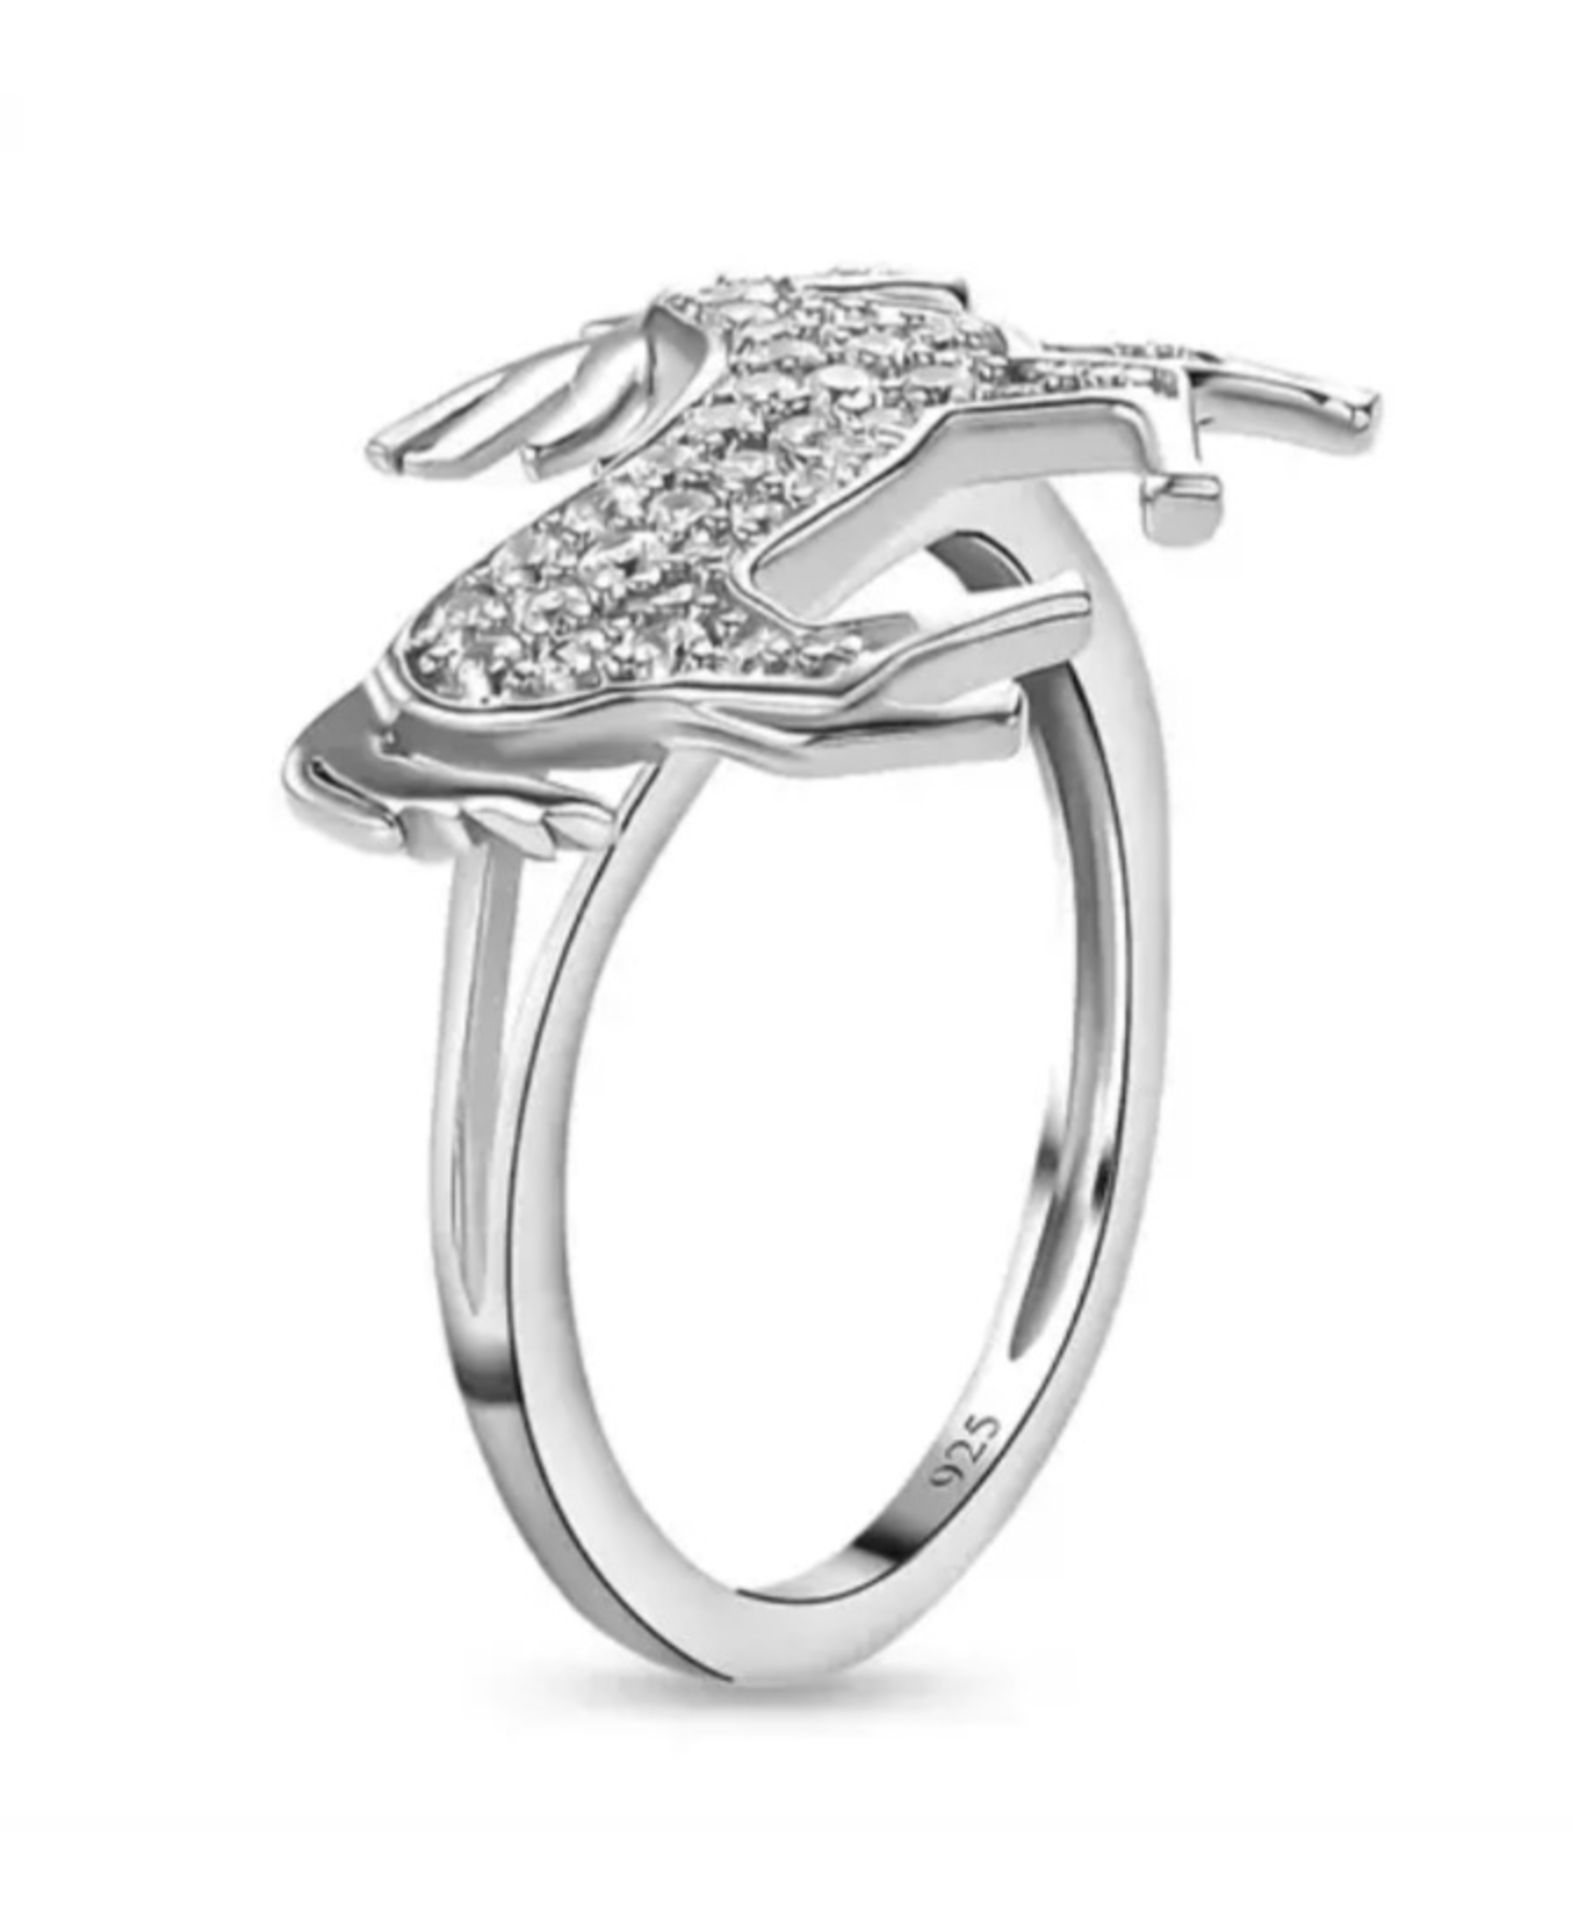 New! Elanza Simulated CZ Unicorn Ring In Platinum Overlay Sterling Silver - Image 3 of 4